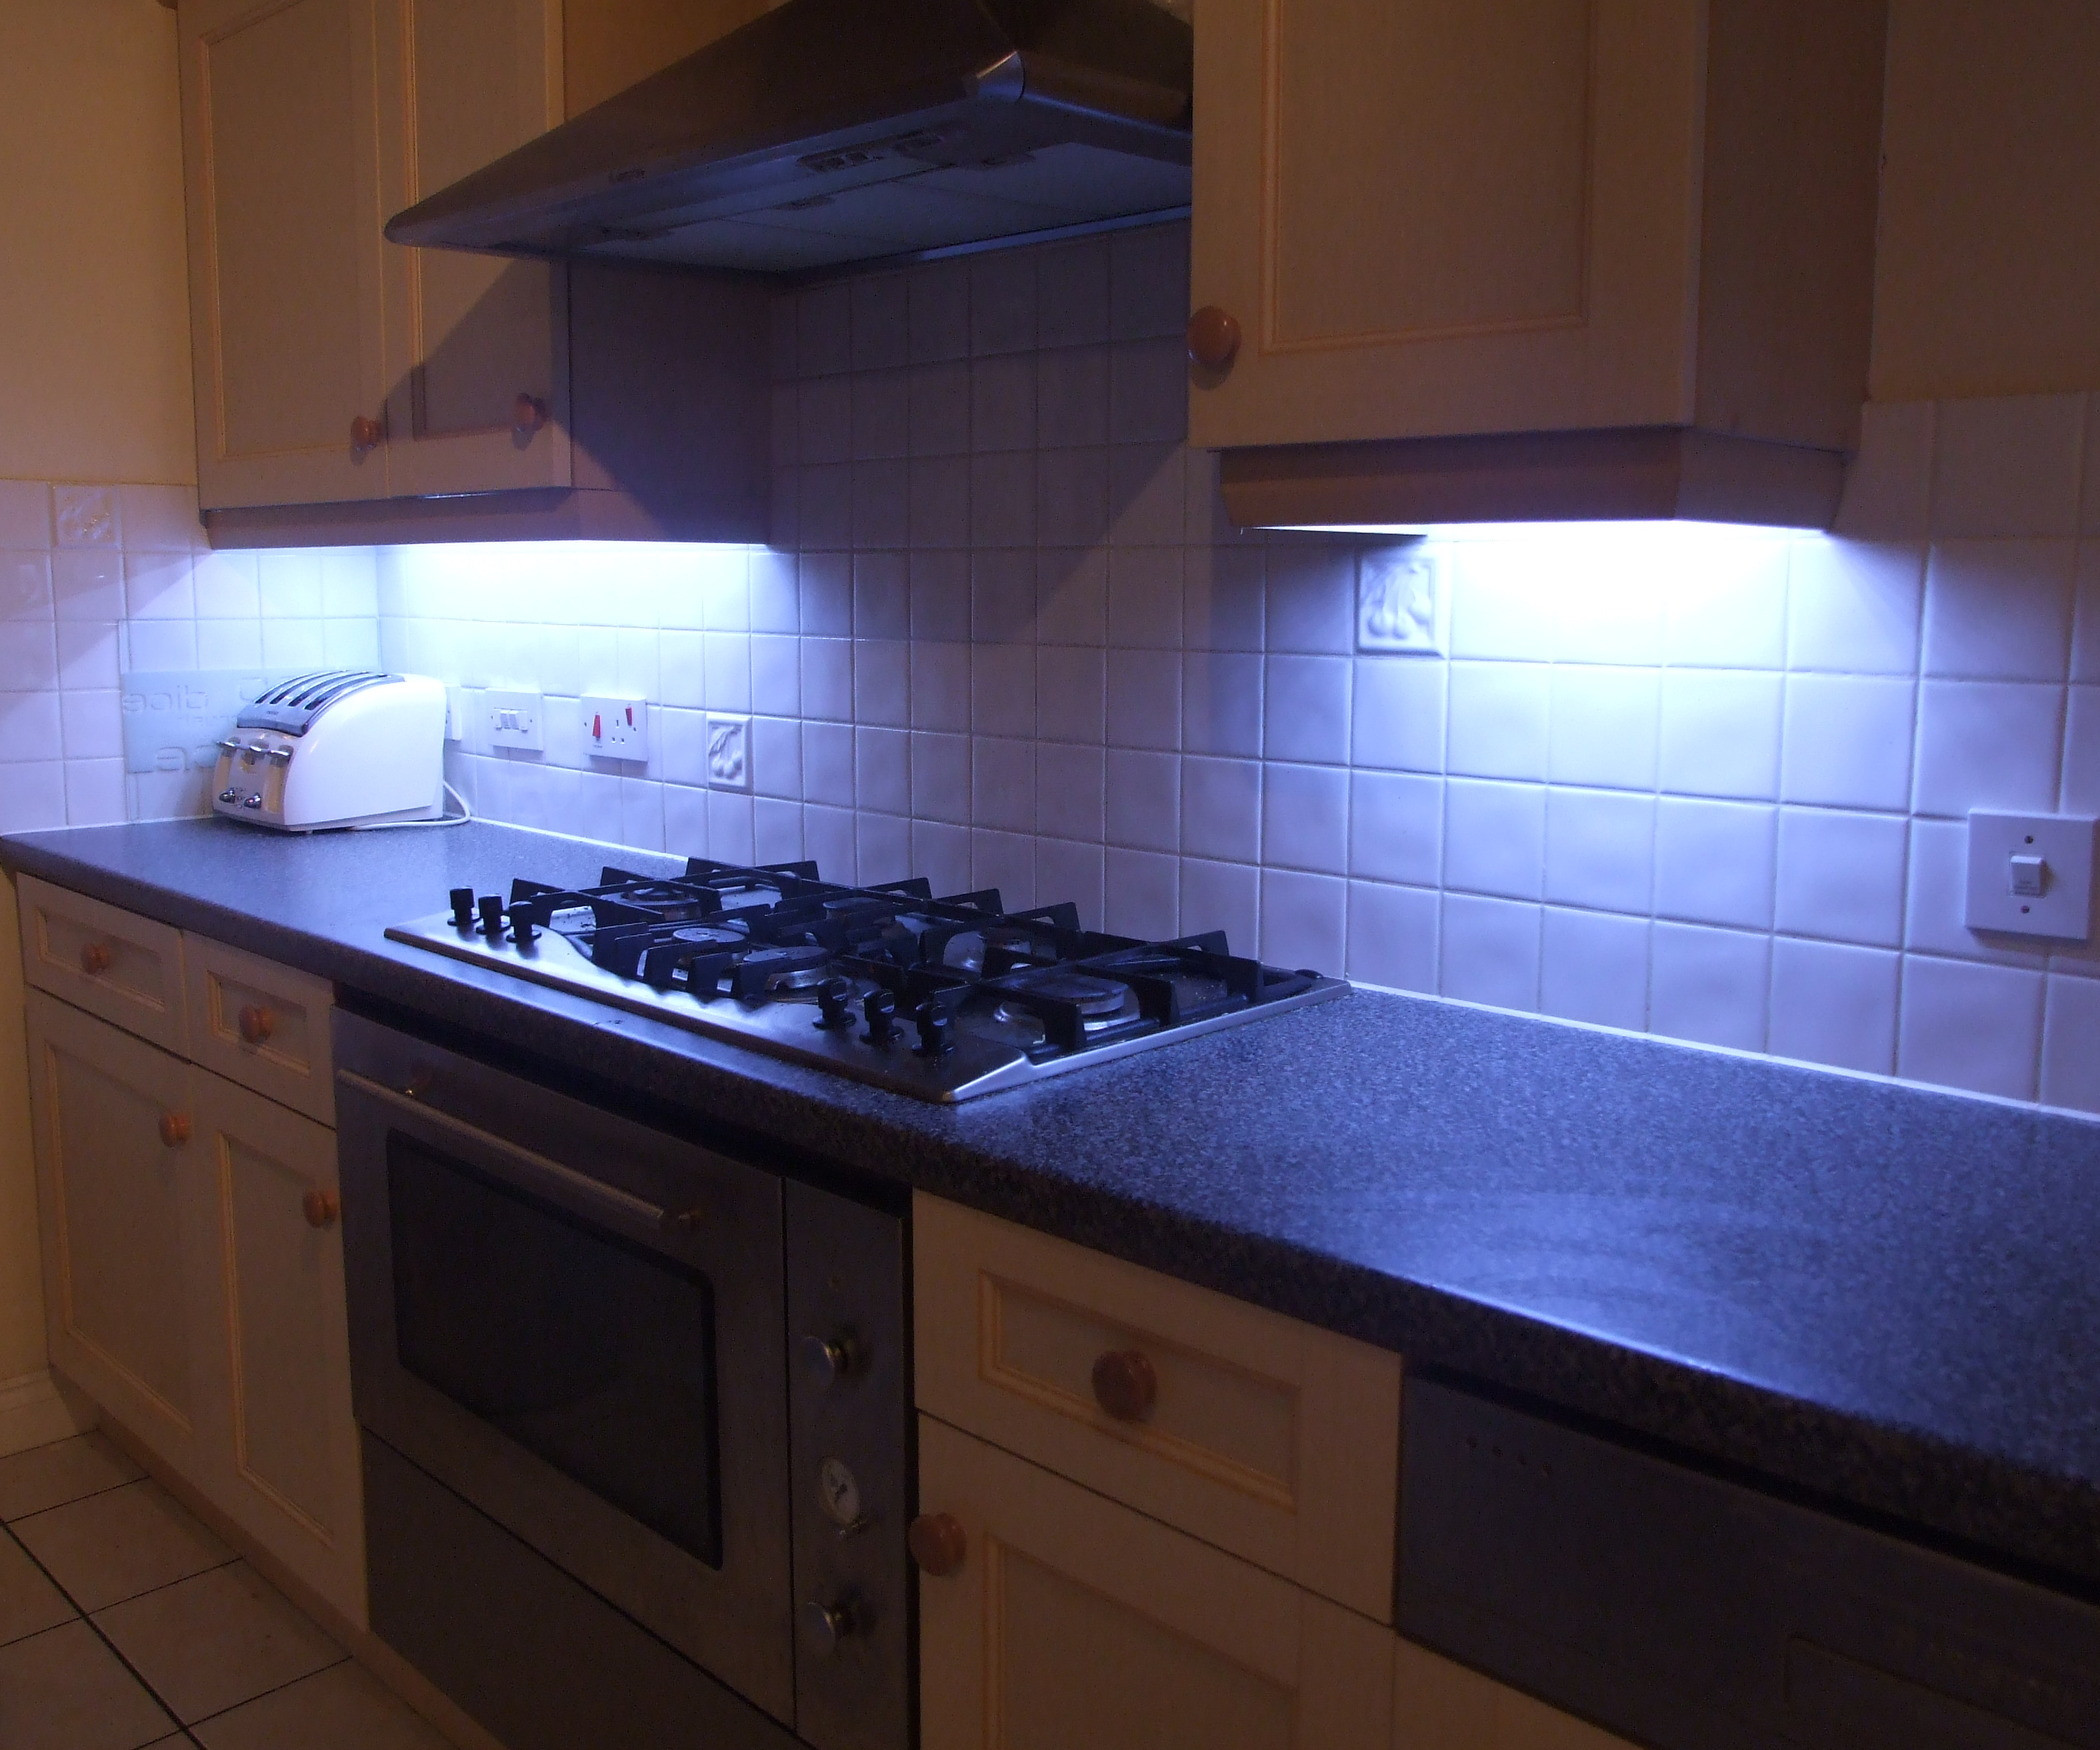 Kitchen Light Led
 How to fit LED kitchen lights with fade effect